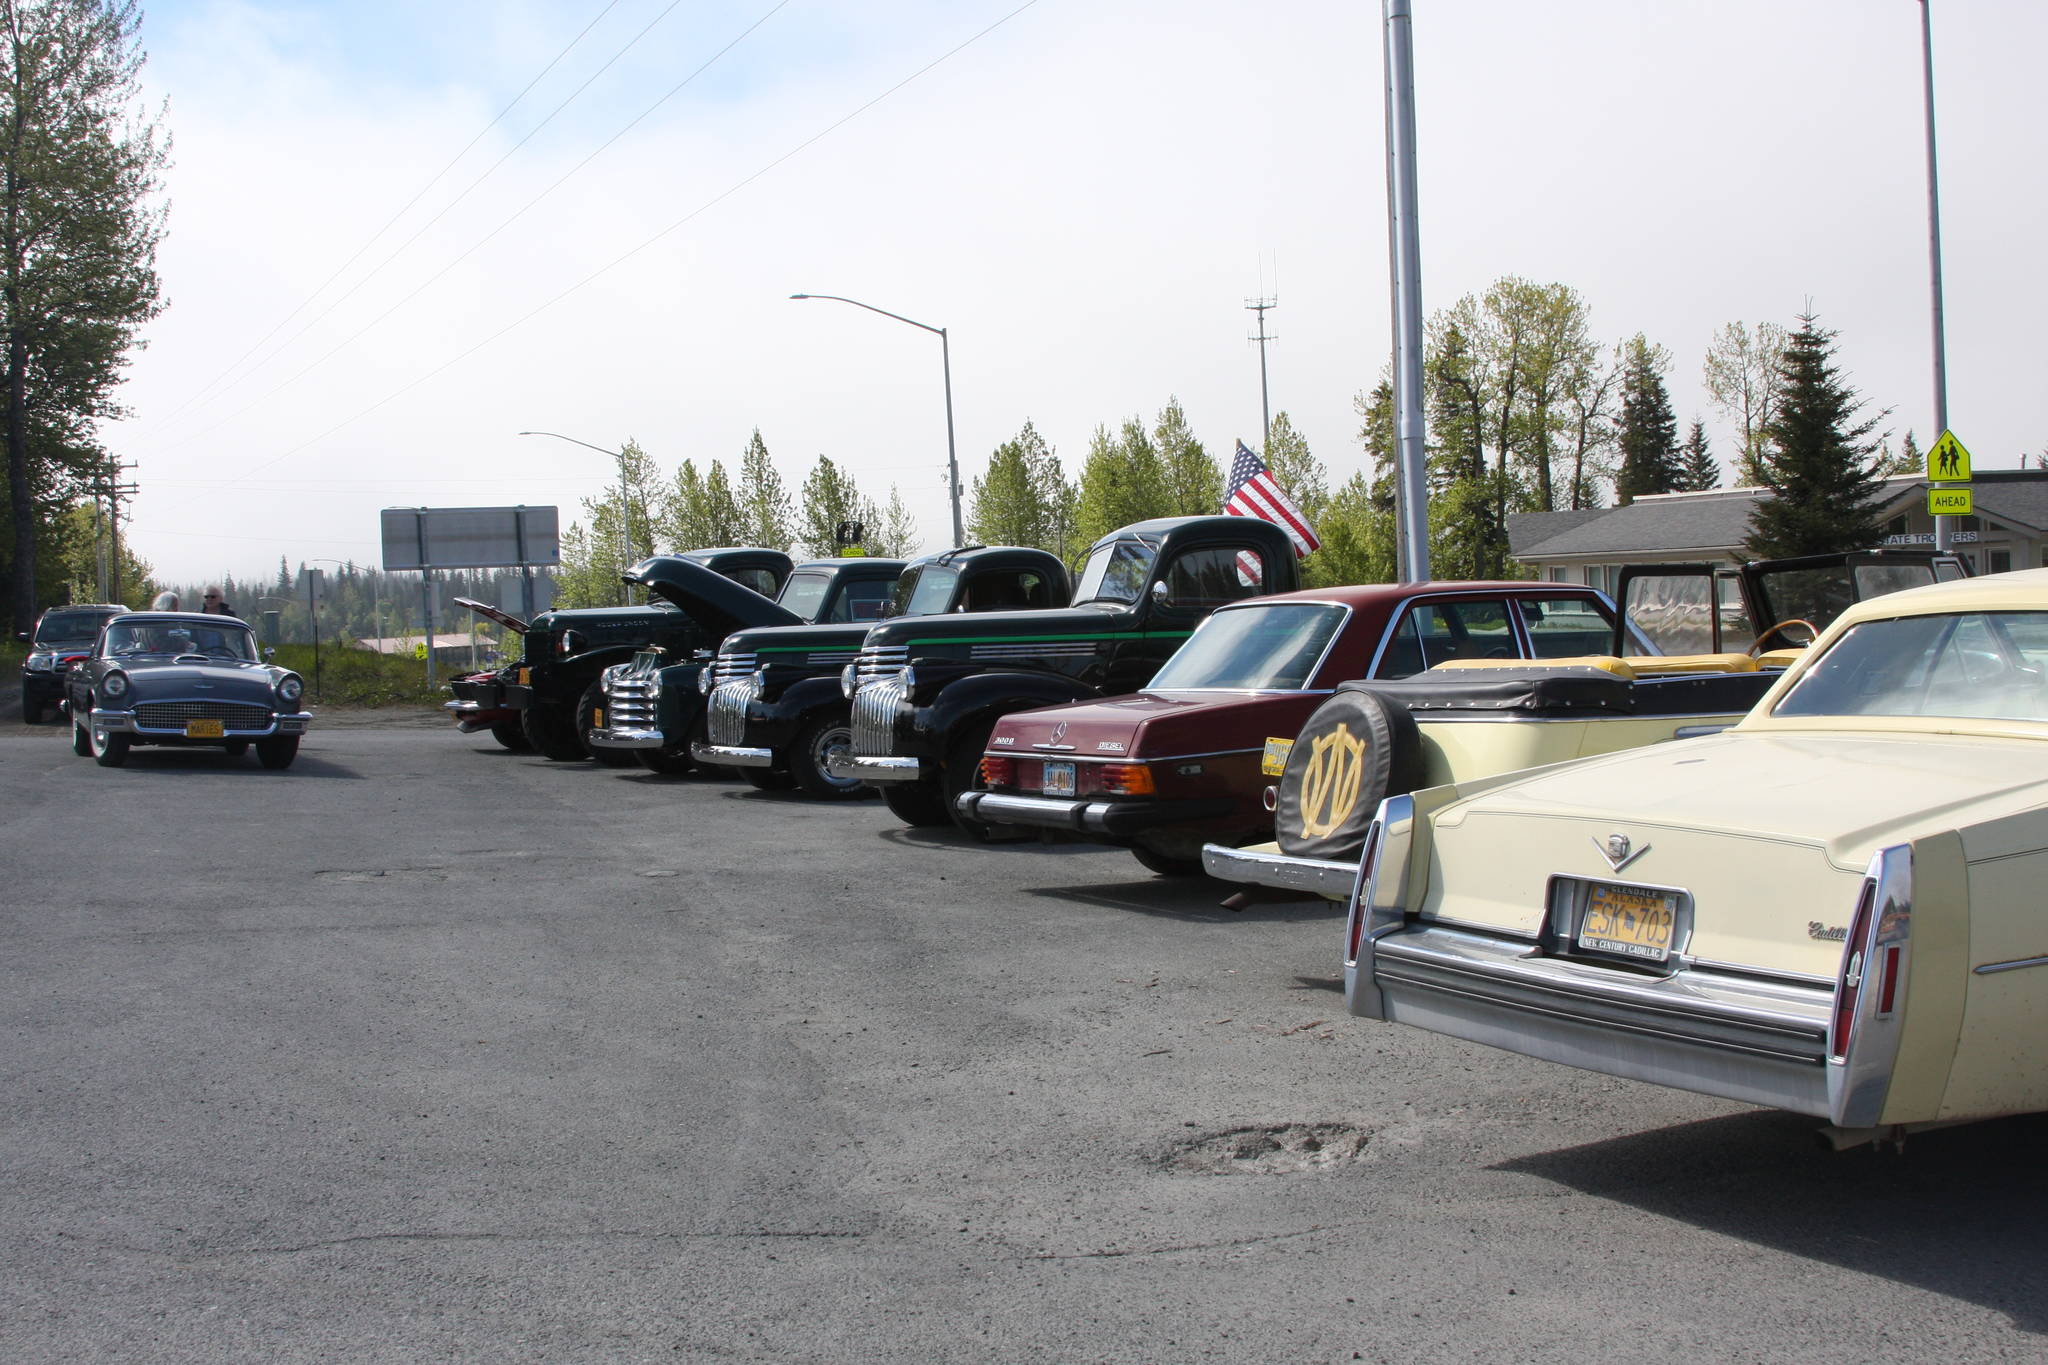 A line of classic cars from local owners and Kaknu Kruzers is displayed at Thurmond’s Far West Auto during their fourth annual Customer Appreciation Day on Saturday, June 9 in Anchor Point, Alaska. (Photo by Delcenia Cosman)